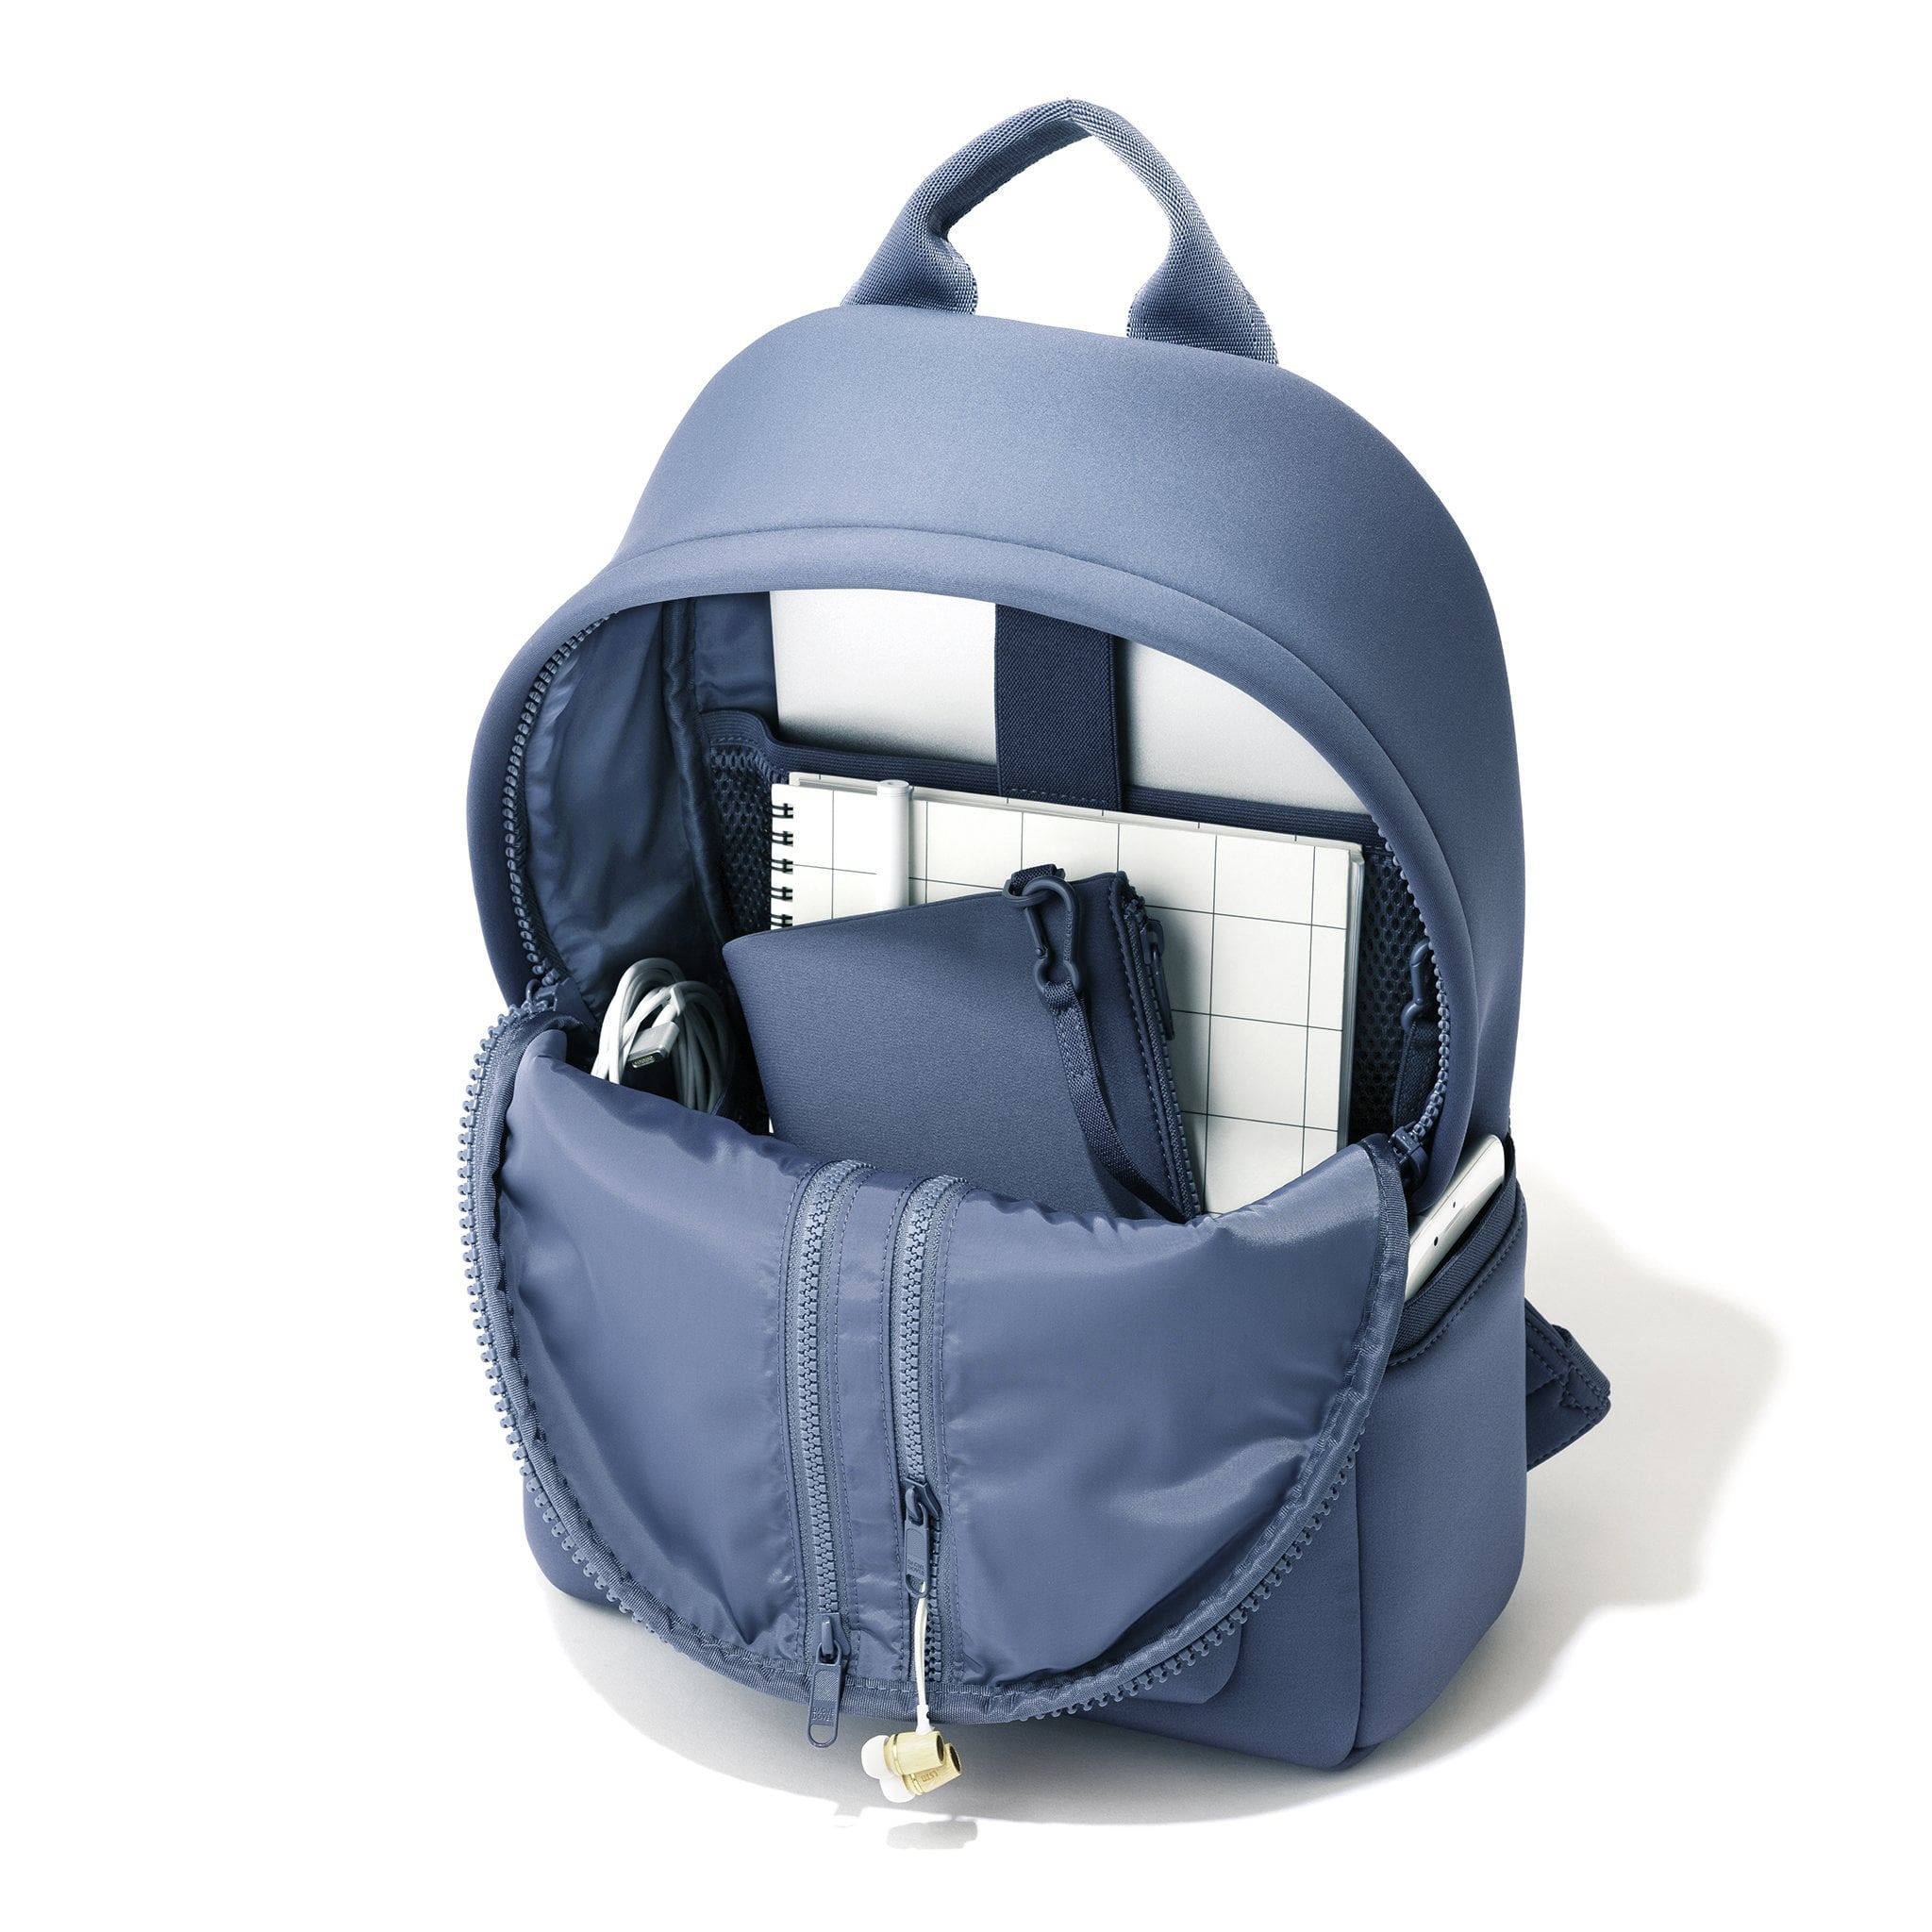 The Dagne Dover Walker Backpack can actually fit everything